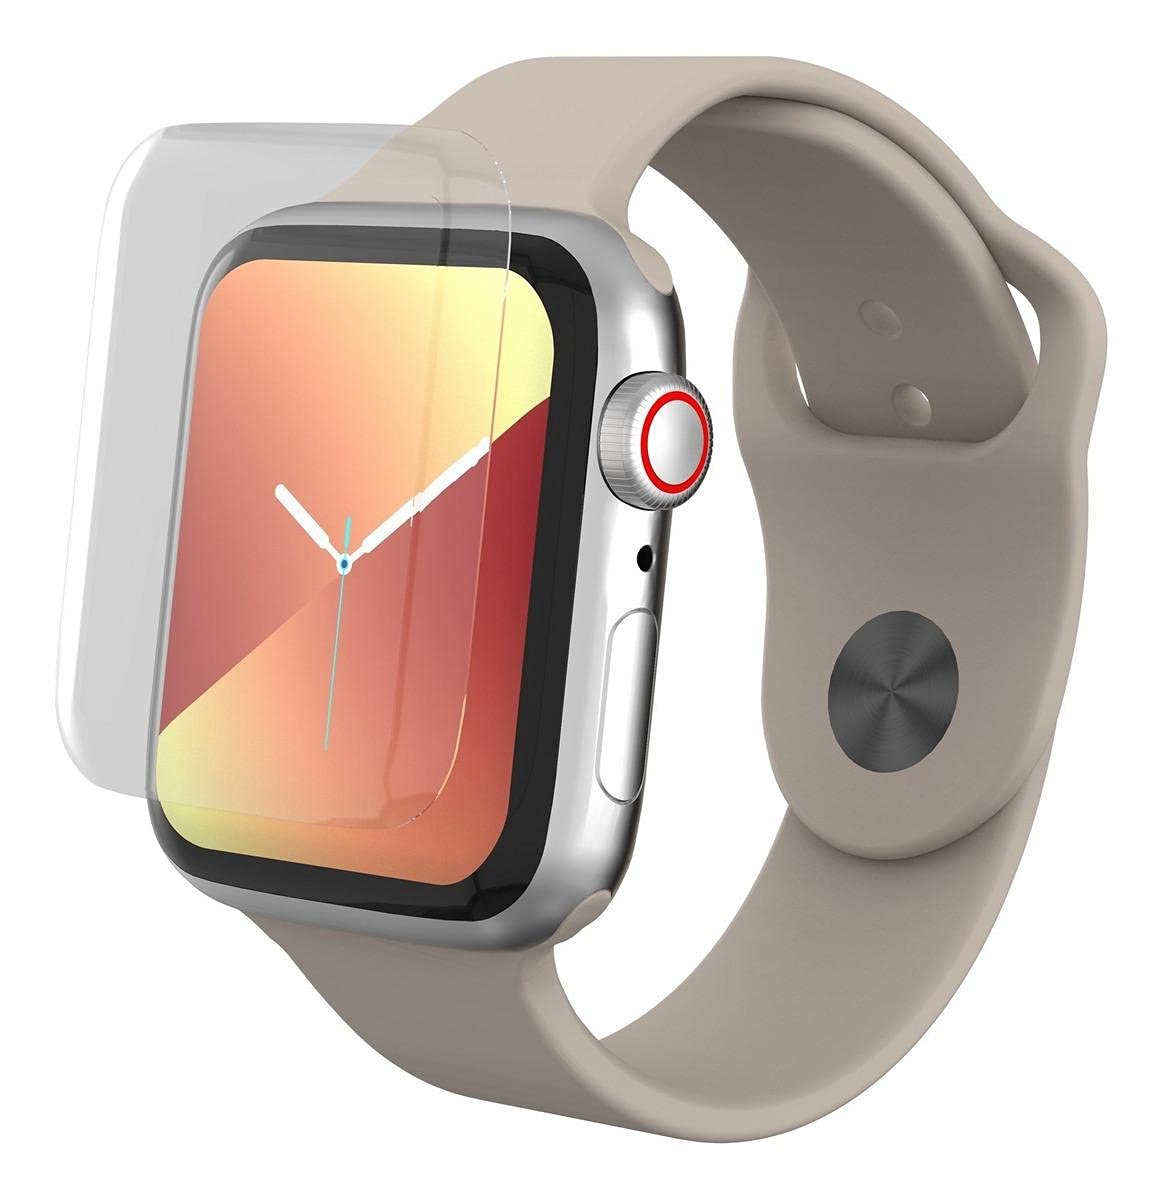 ZAGG InvisibleShield Ultra Clear Apple Watch Series 5 (40mm) Case Friendly Screen